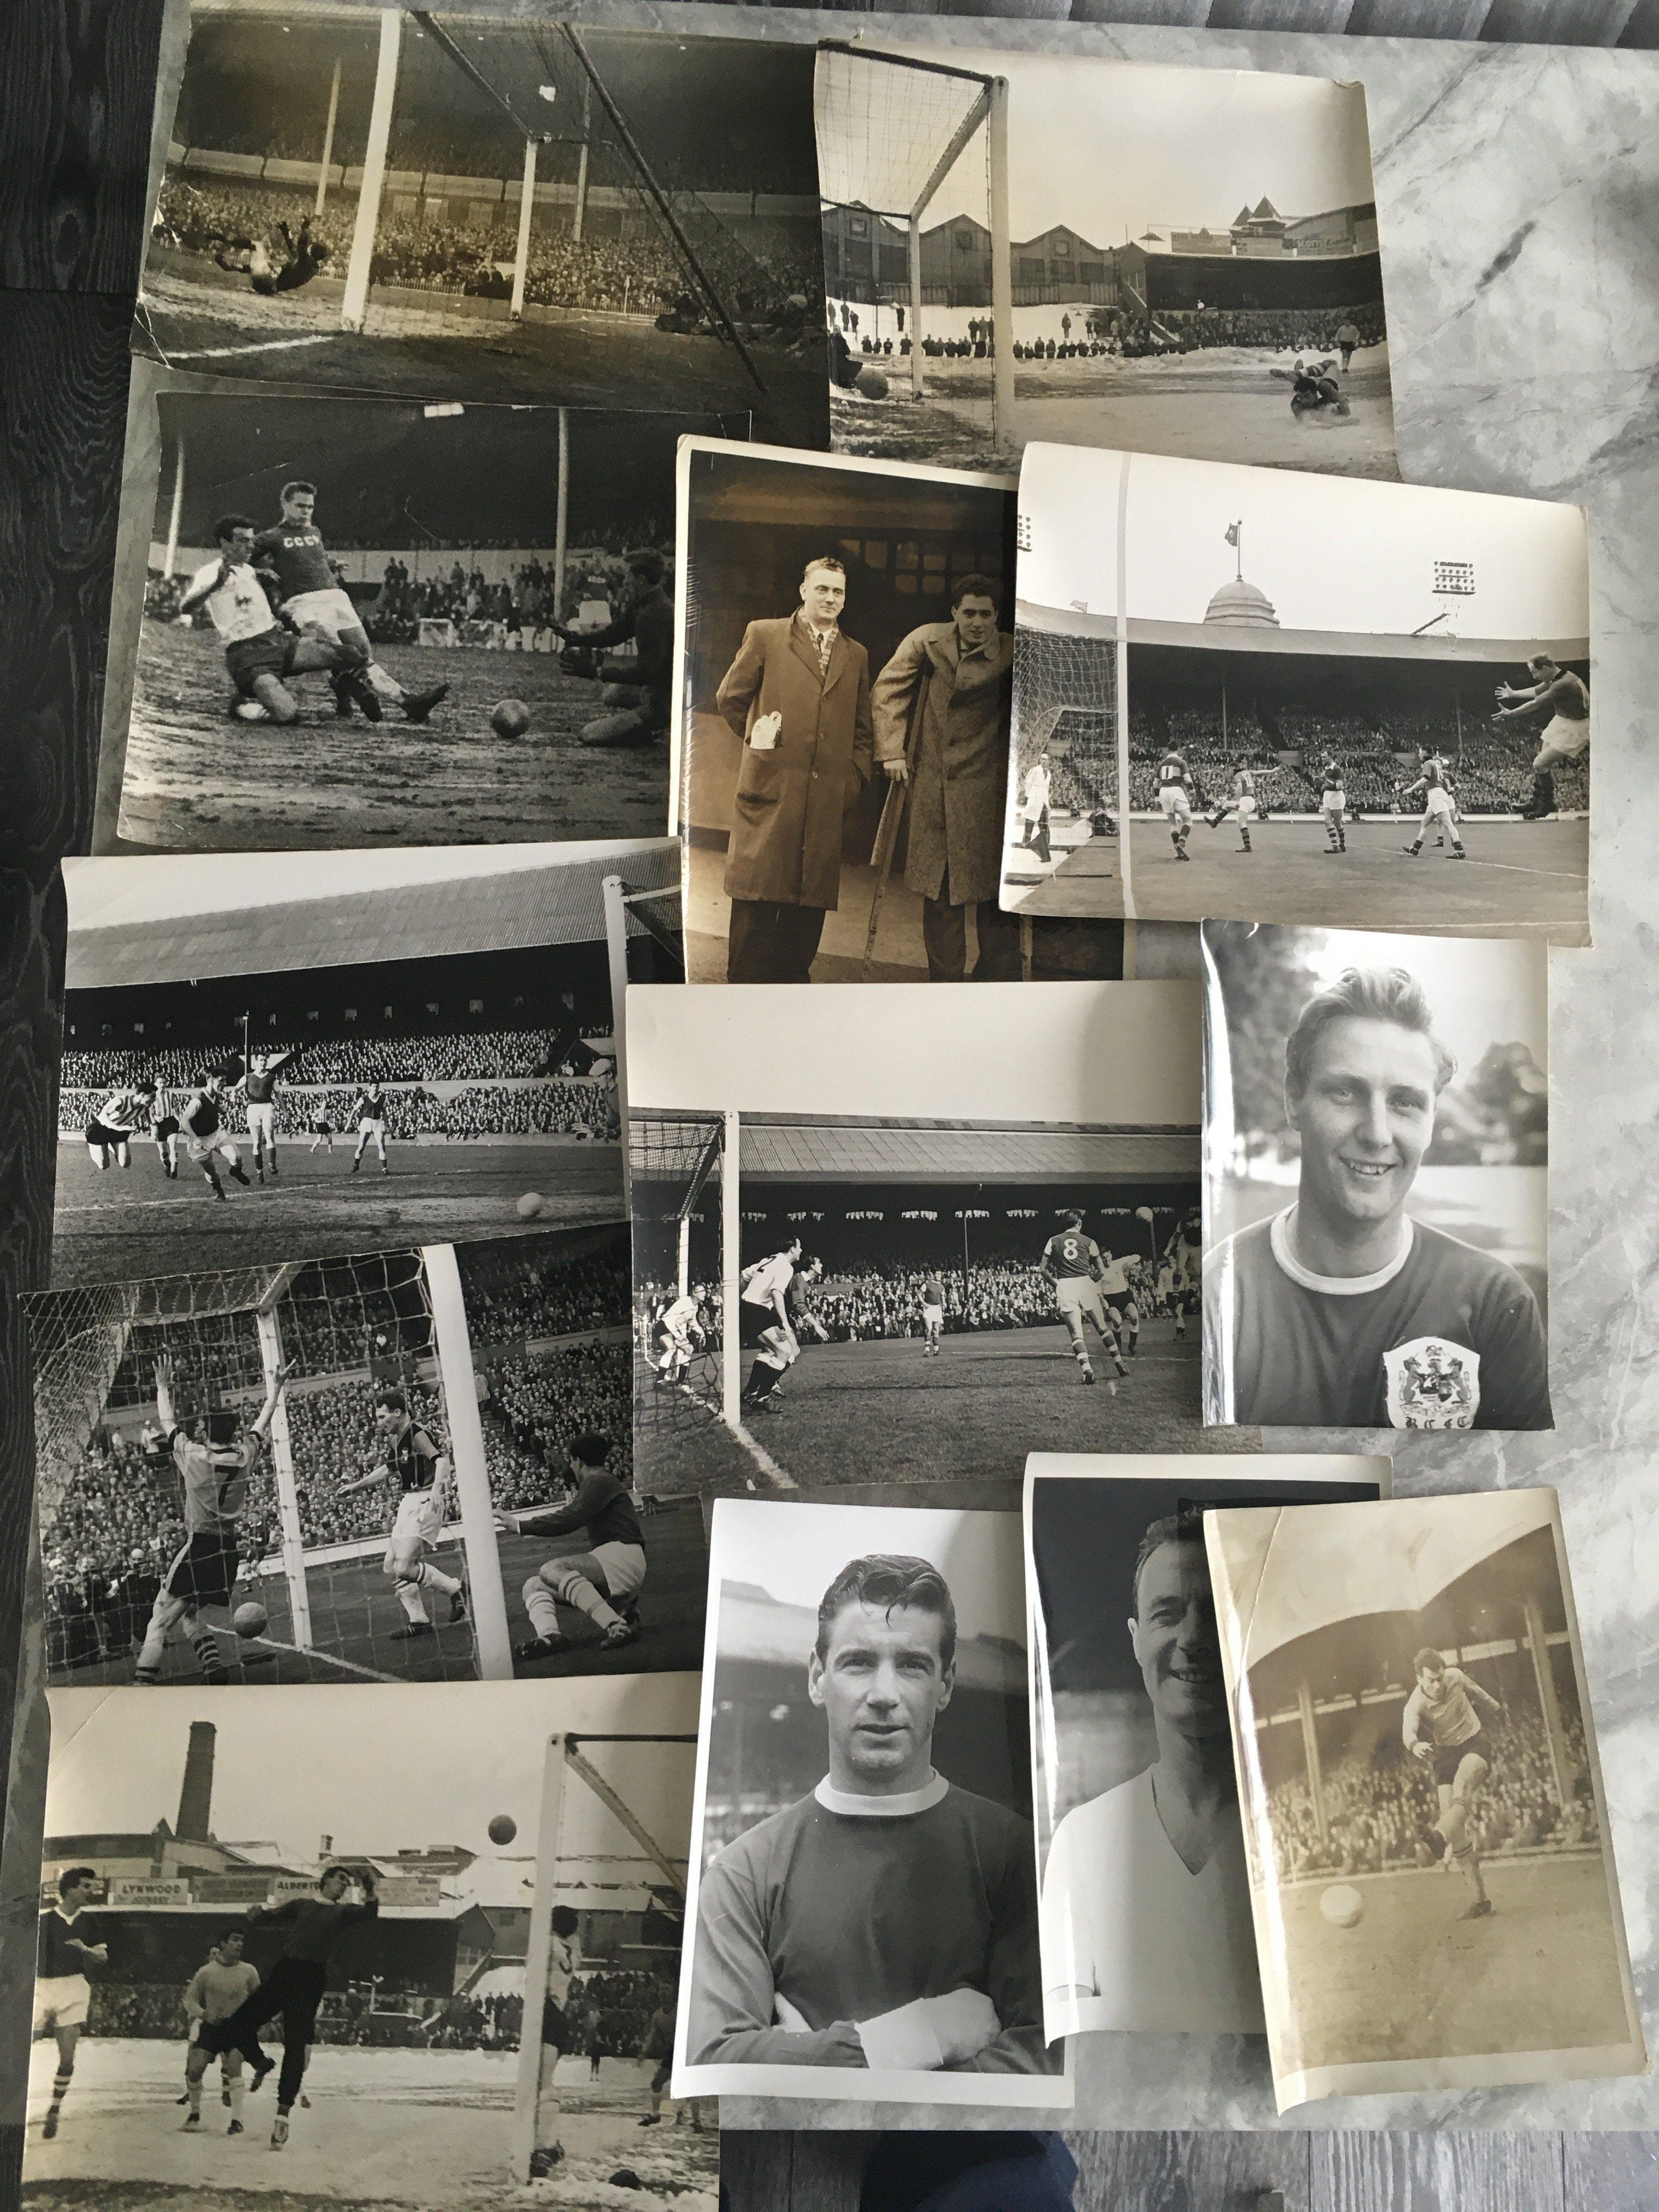 1960s Large Football Press Photo Collection: From 1962 to 1964 with press stamps and annotations - Image 3 of 3